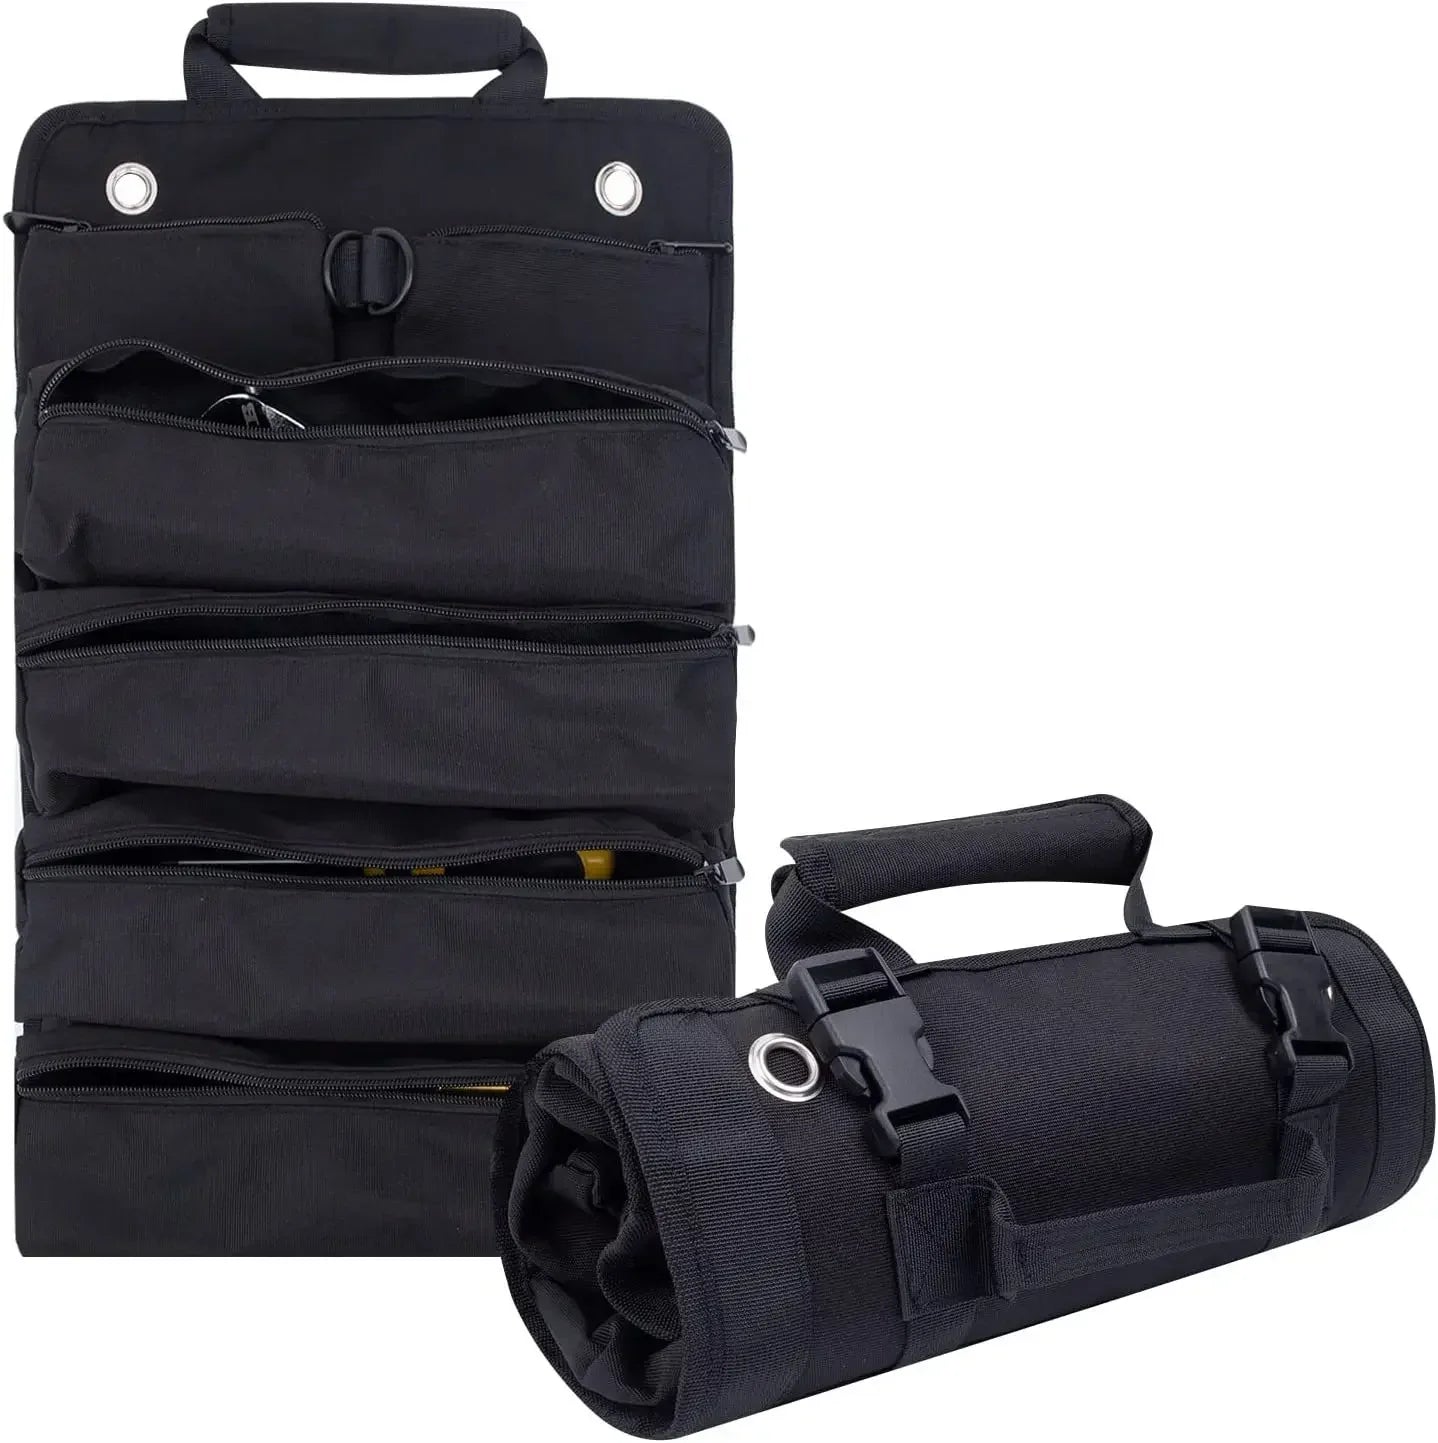 Silbay™ ToolTote RollMaster